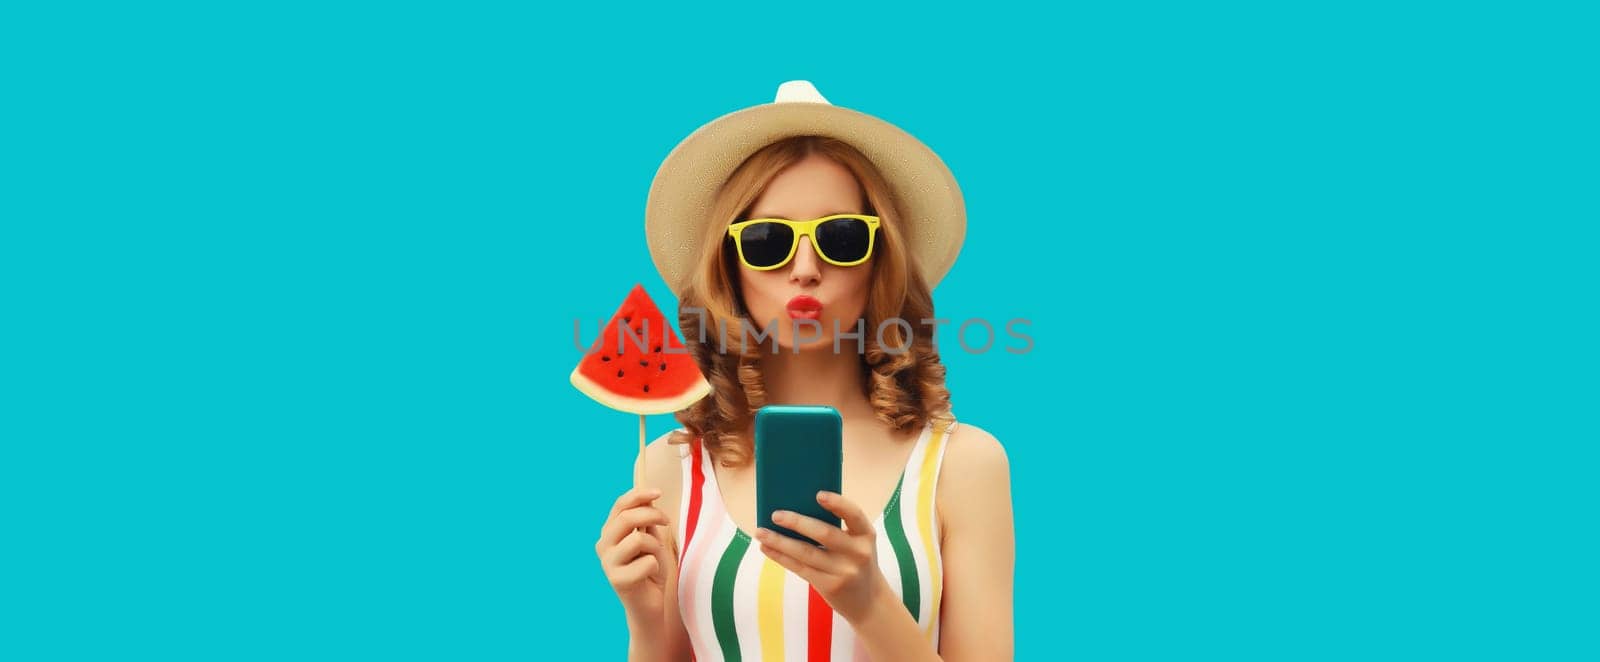 Summer portrait of happy young woman holding smartphone with juicy lollipop or ice cream shaped slice of watermelon wearing straw hat on blue background